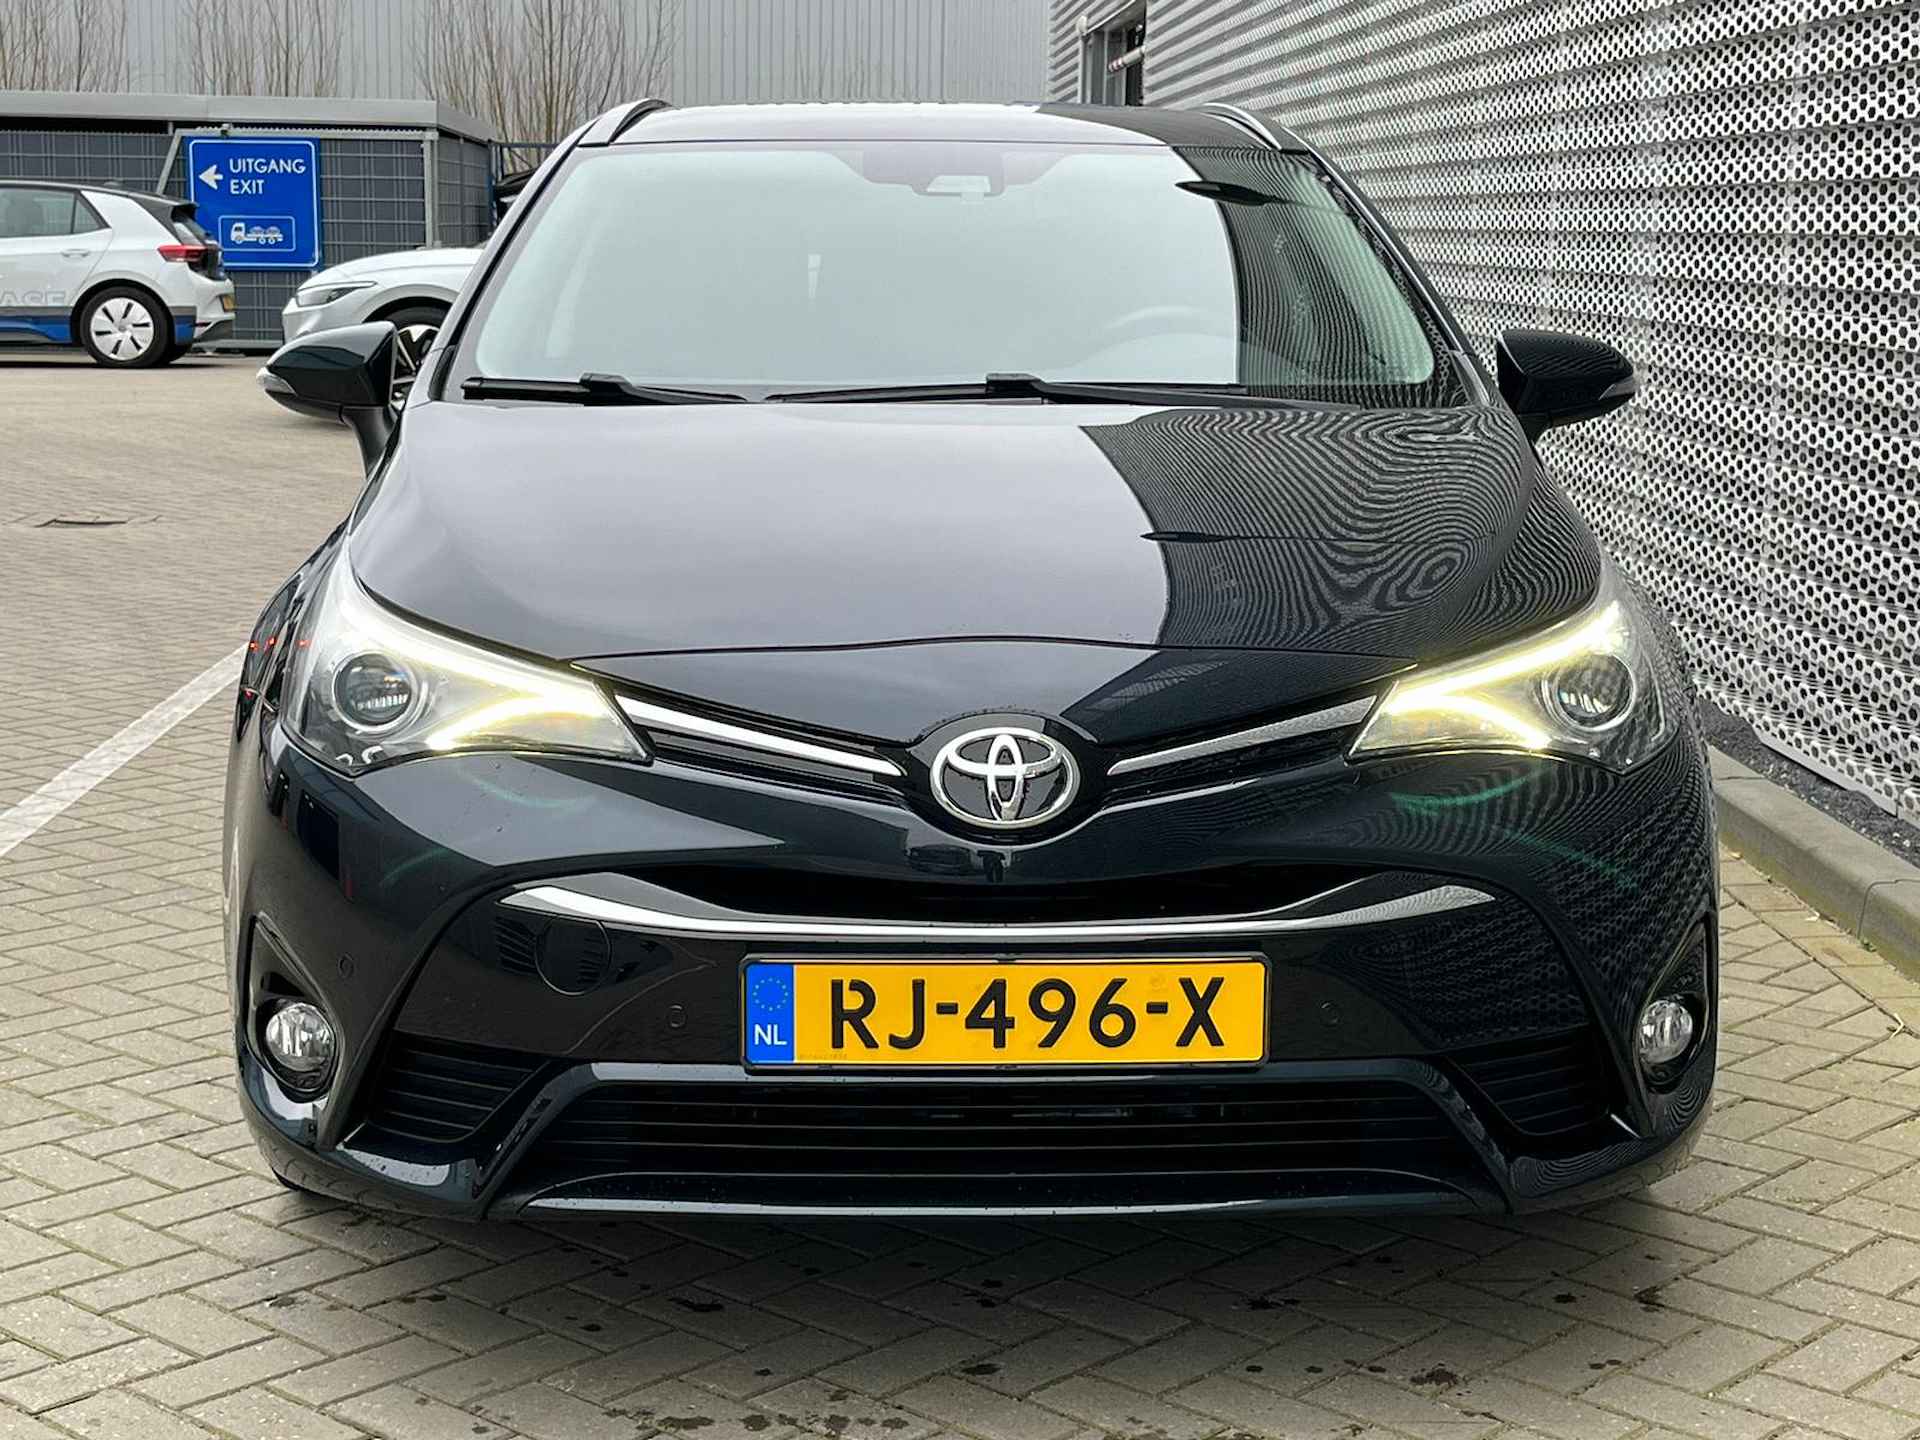 Toyota Avensis Touring Sports 1.8 VVT-i SkyView Edition - 11/28